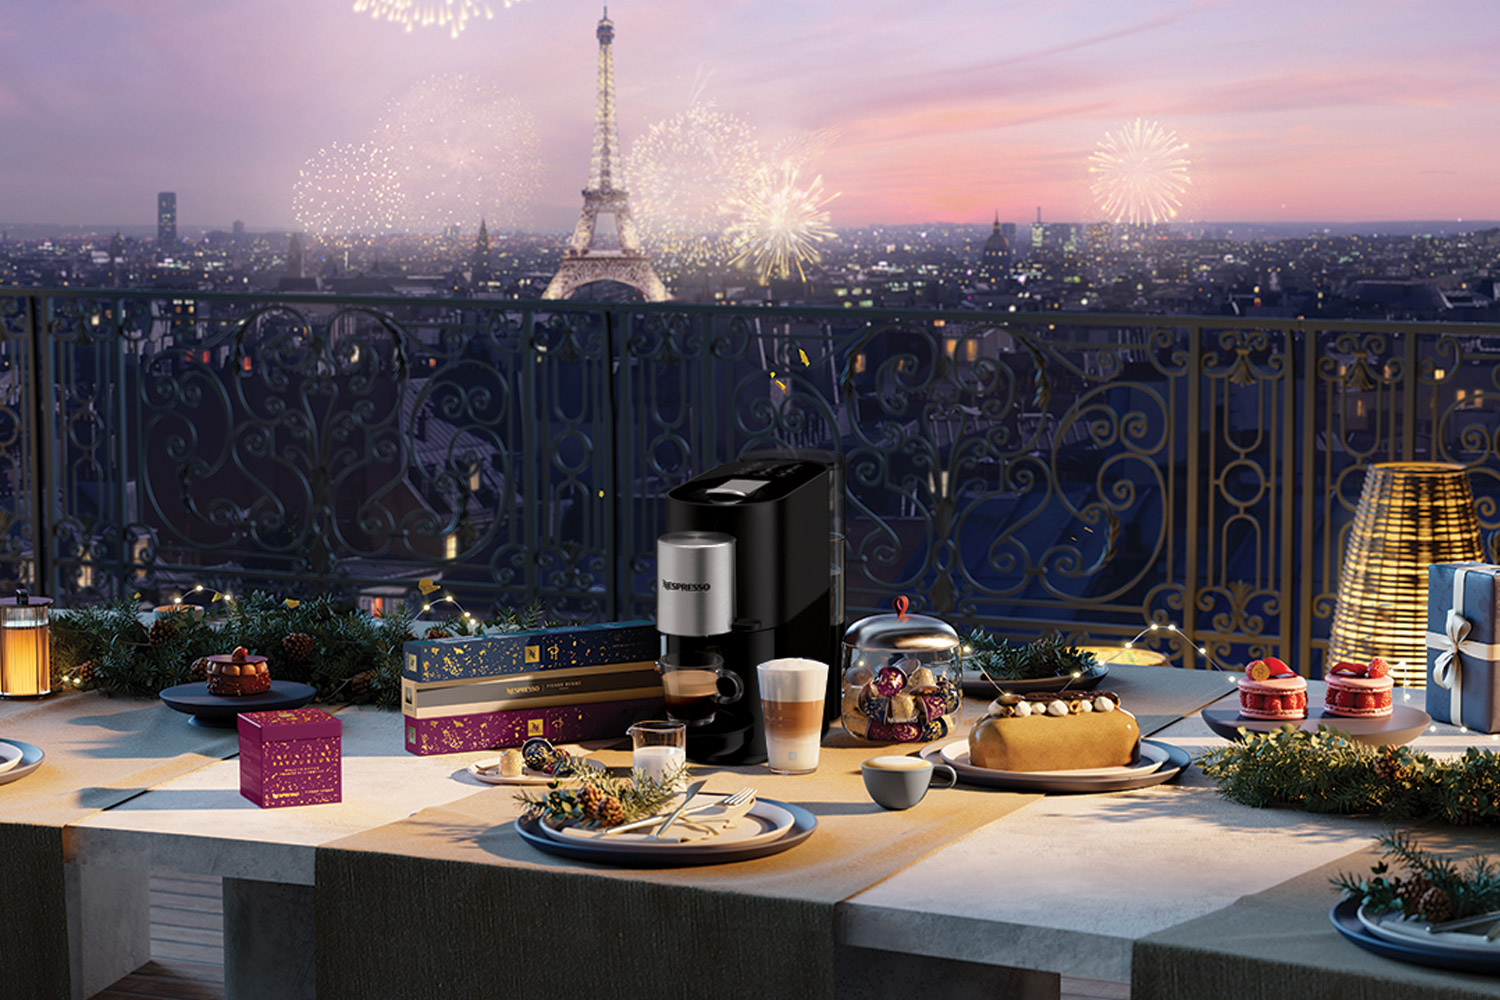 Nespresso and Pierre Hermé join forces to kick off festive season